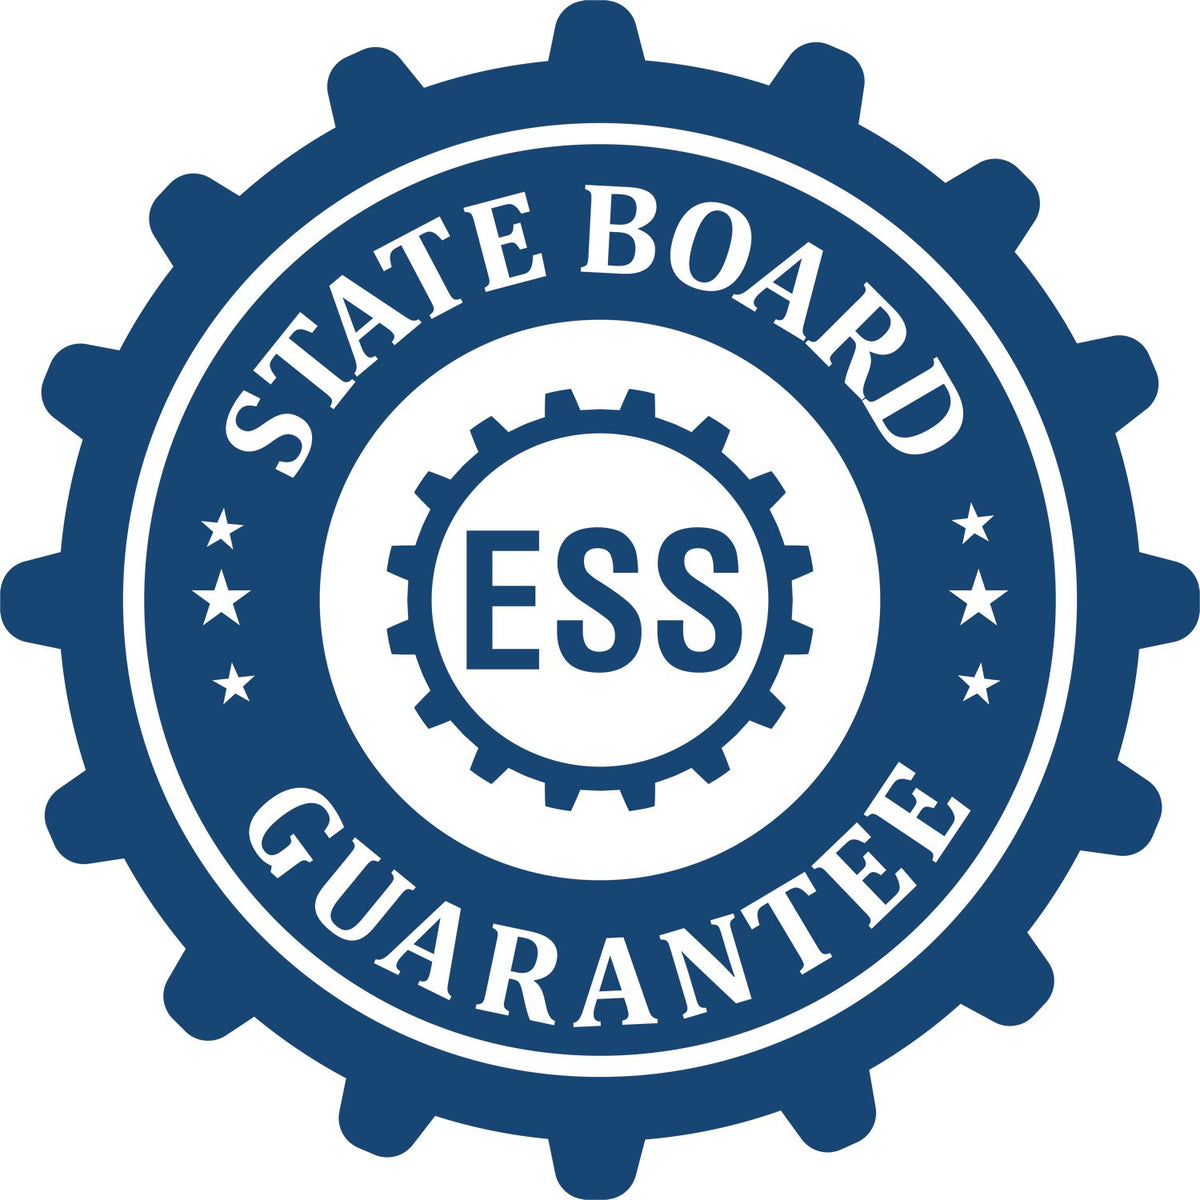 An emblem in a gear shape illustrating a state board guarantee for the Utah Desk Architect Embossing Seal product.